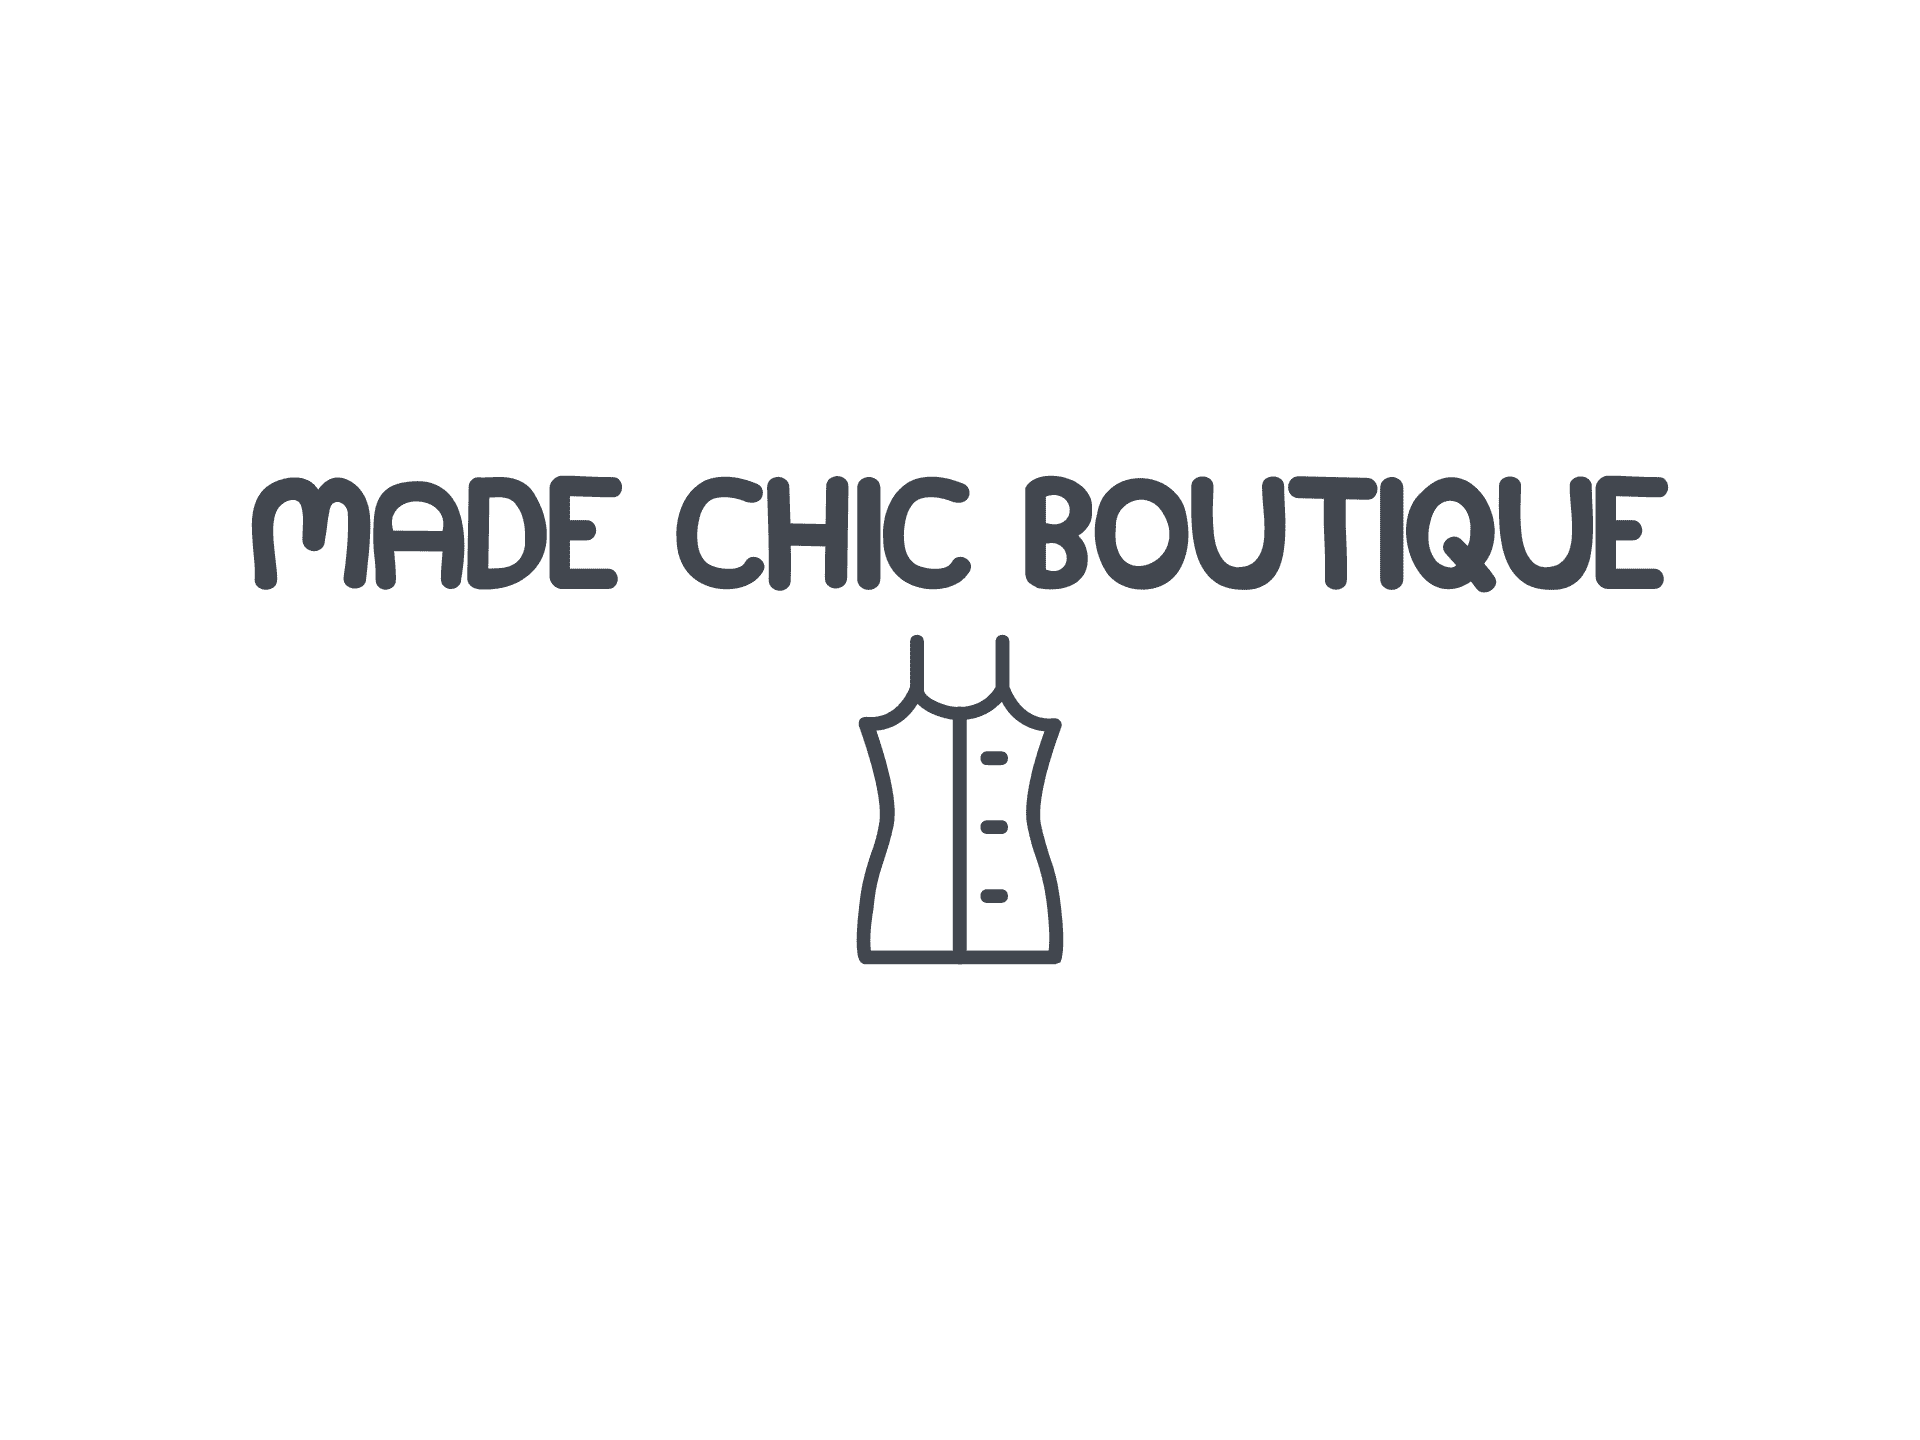 Made Chic Boutique